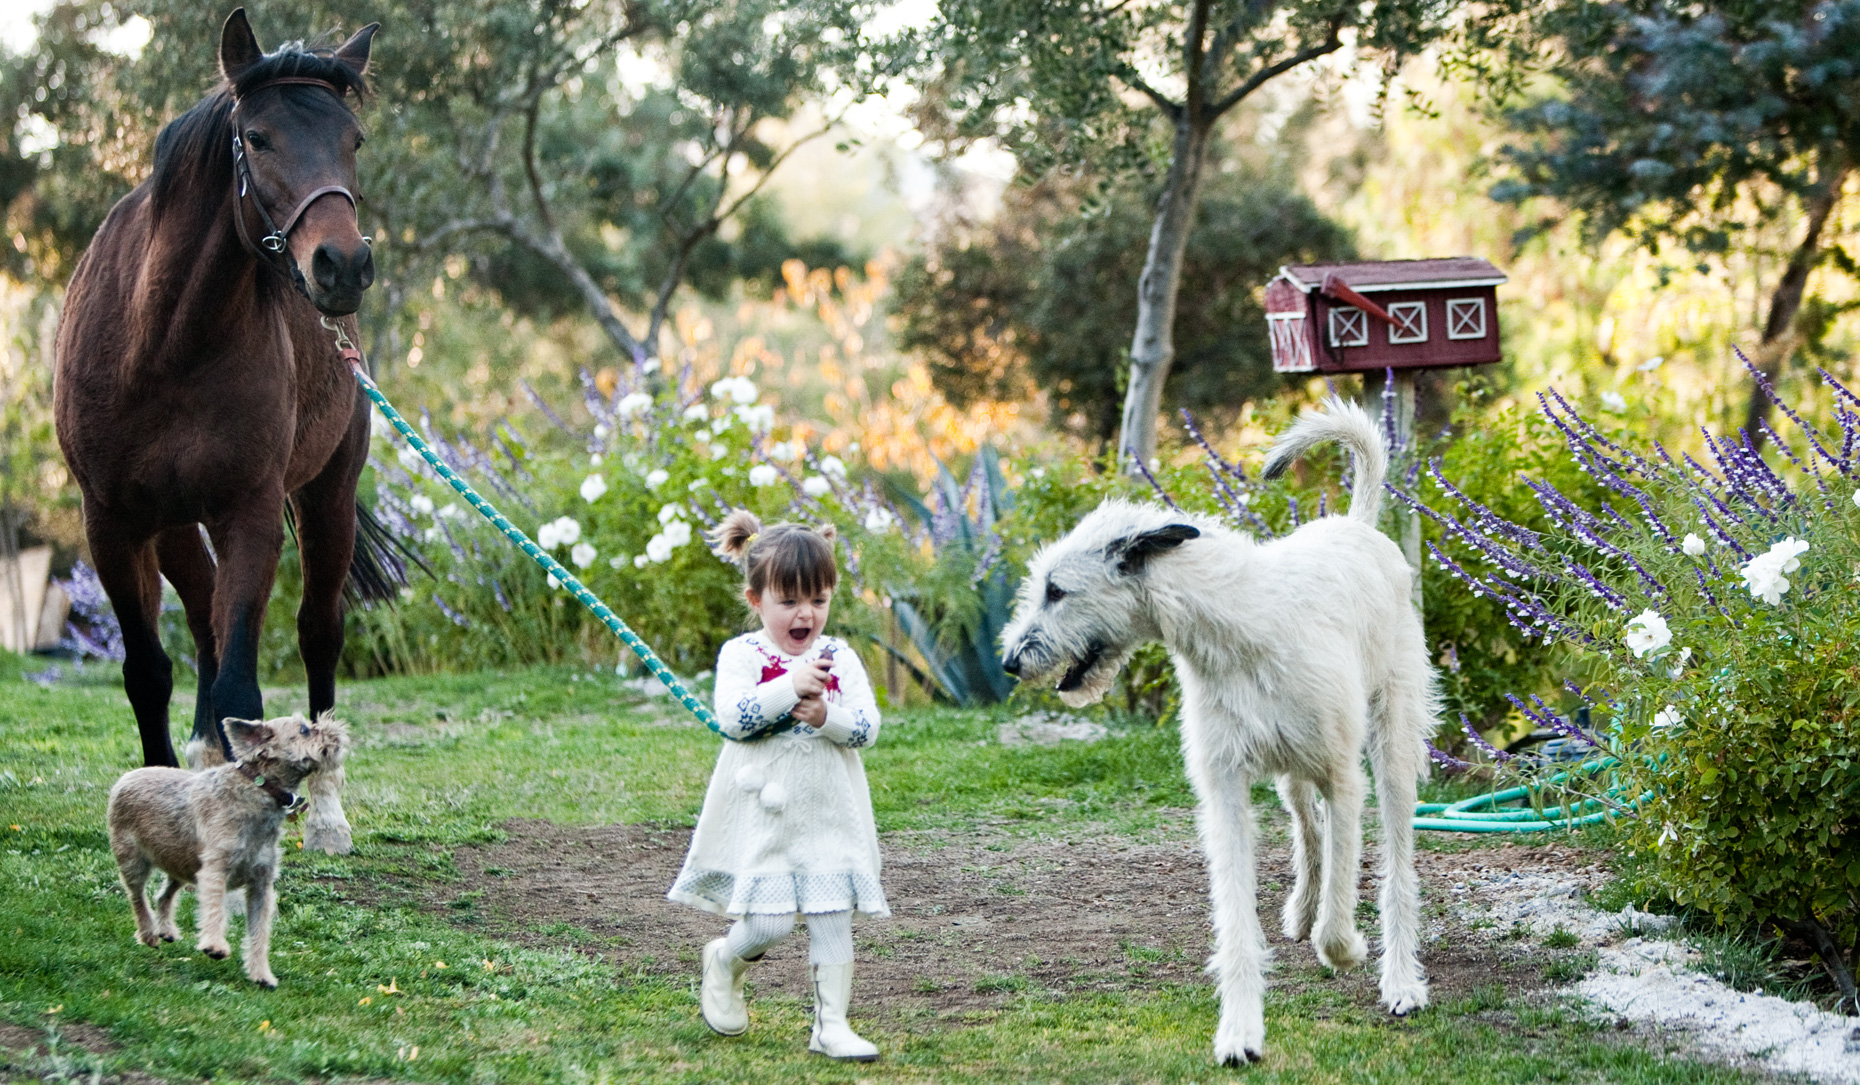 Los Angeles Dog Photography, Michael Brian, pet, cat, children, Irish Wolfhound, terrier, Young girl laughing with horse and two dogs